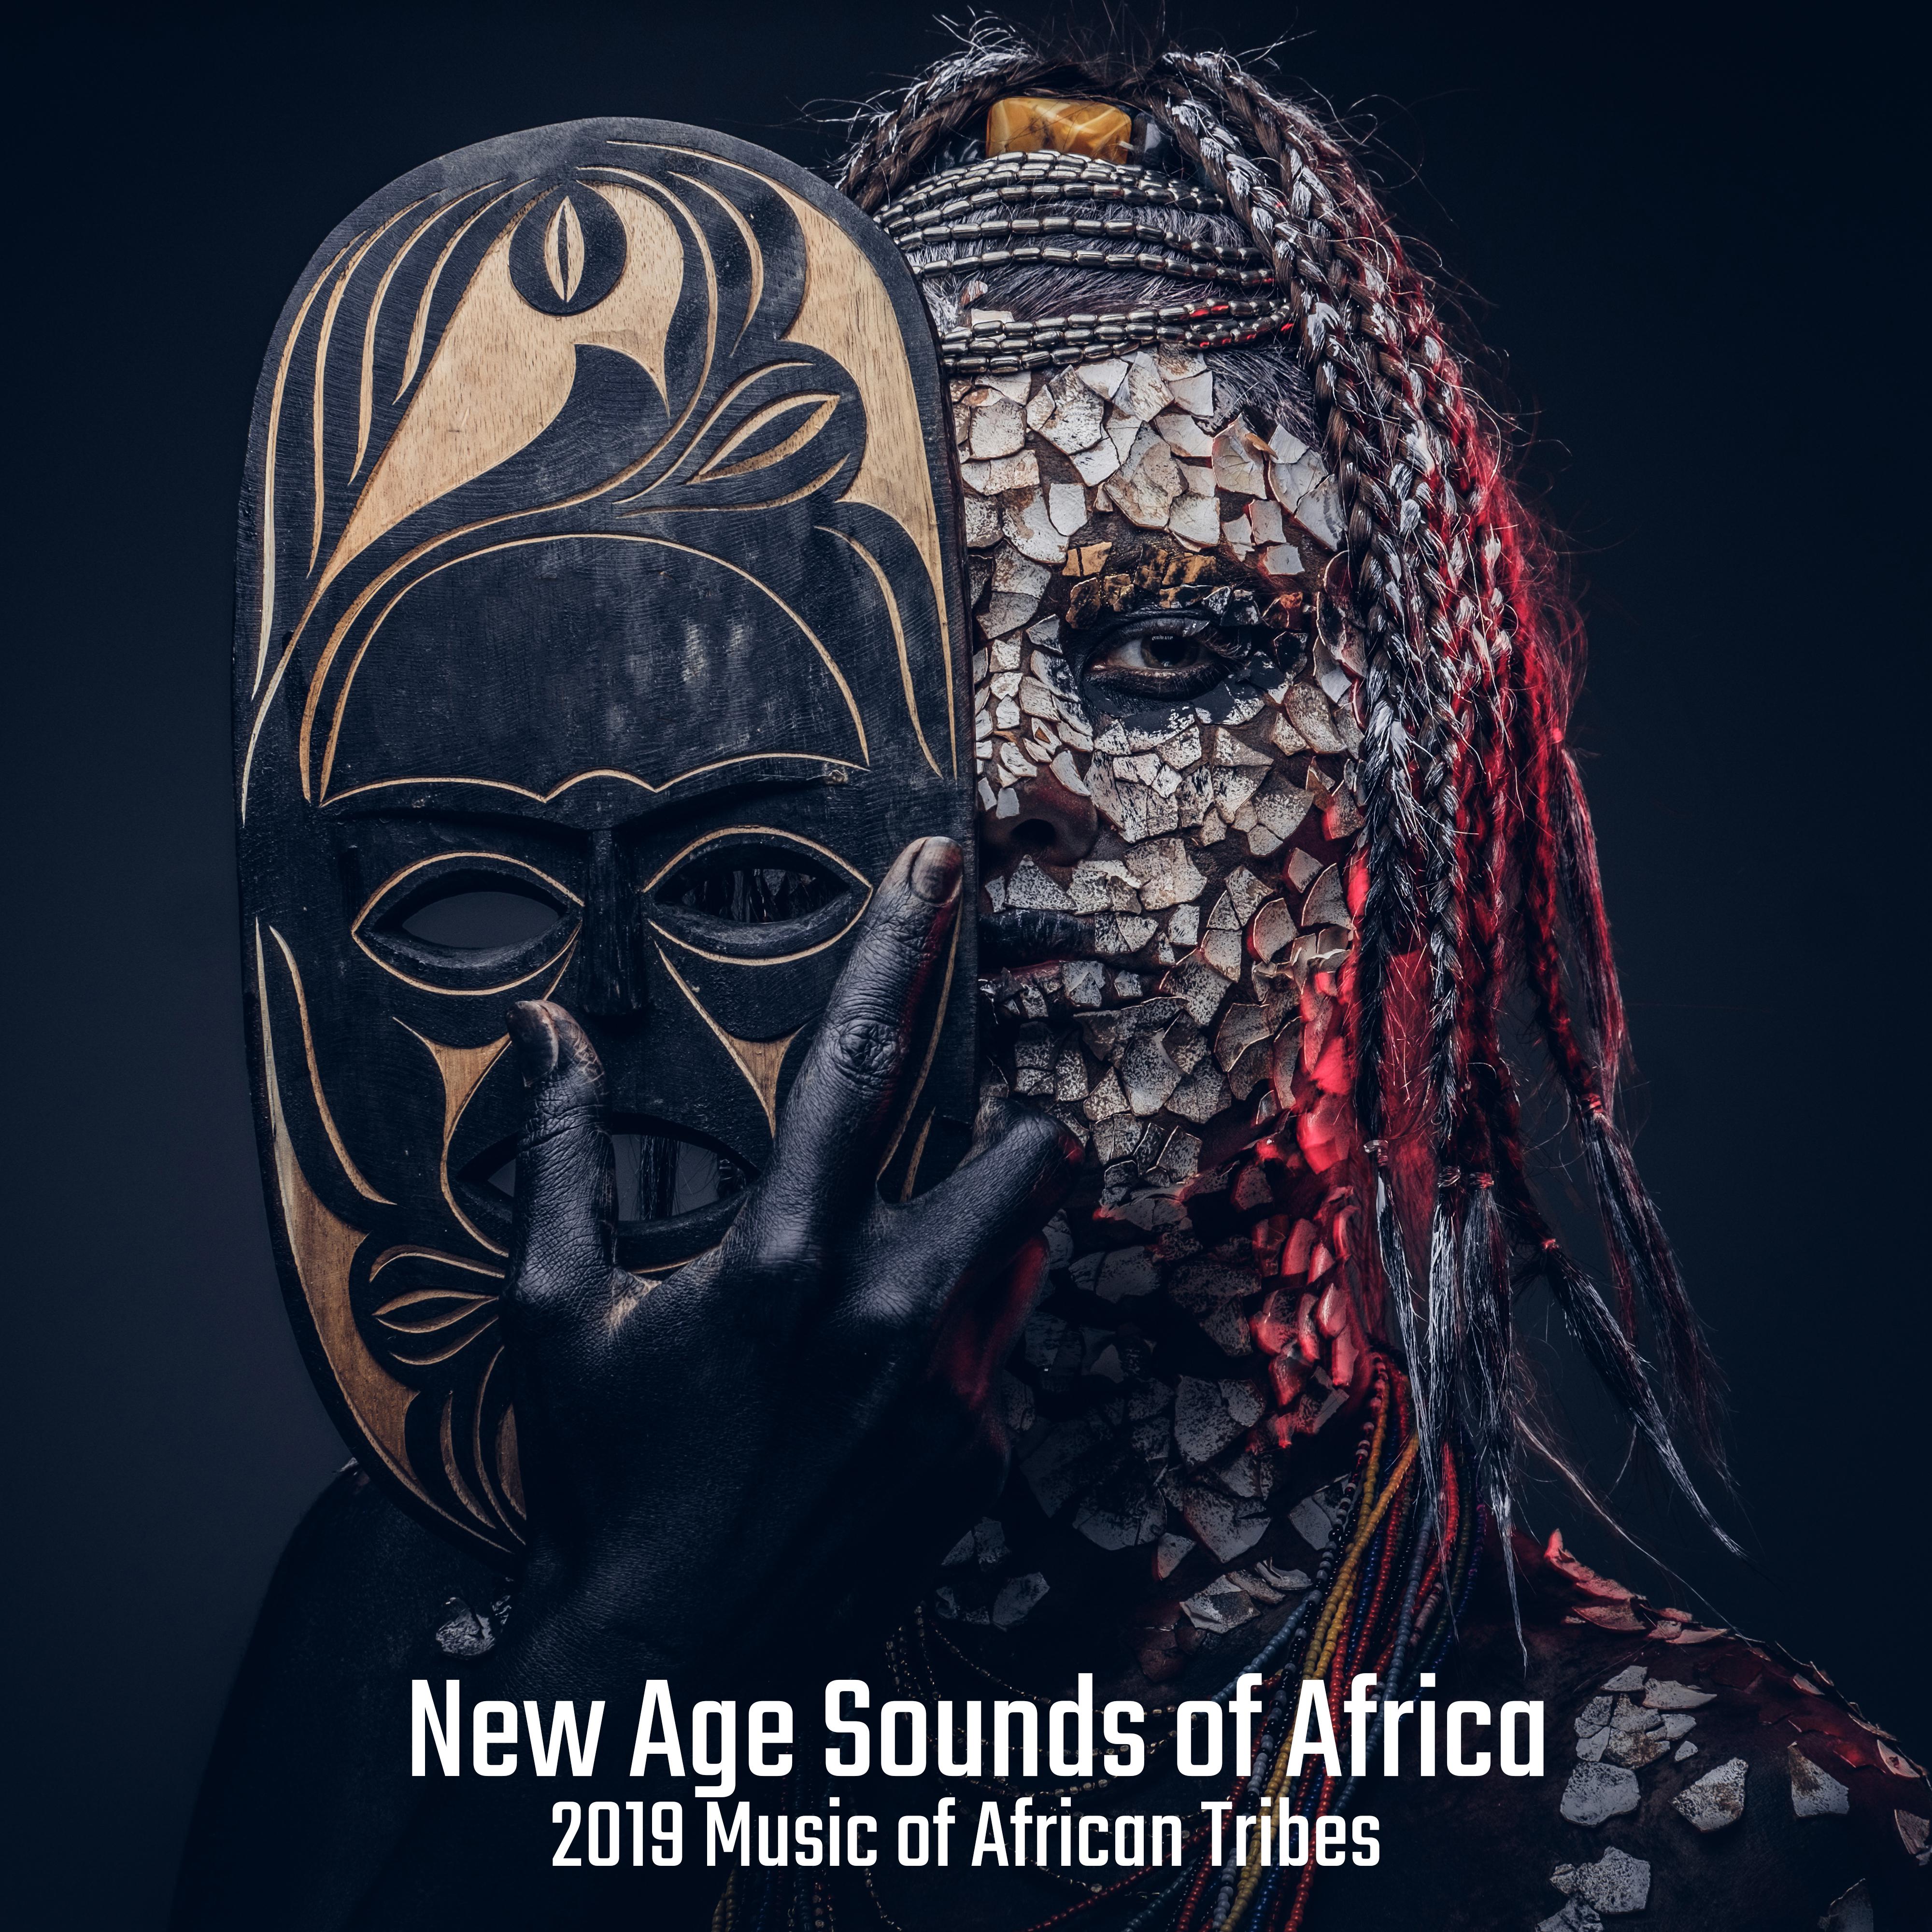 New Age Sounds of Africa: 2019 Music of African Tribes